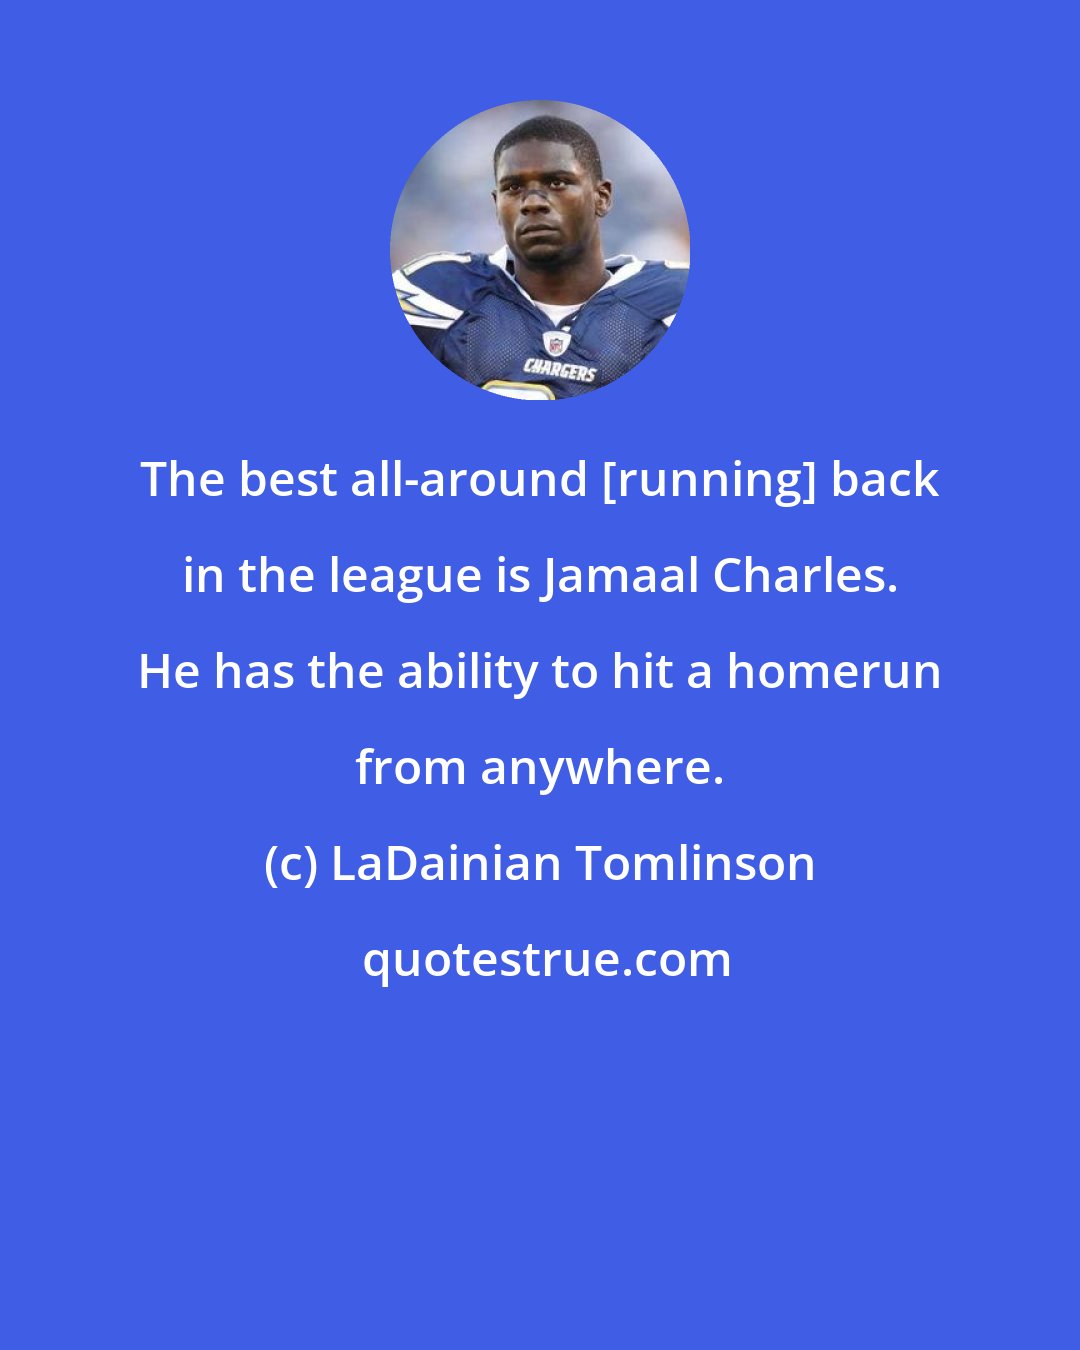 LaDainian Tomlinson: The best all-around [running] back in the league is Jamaal Charles. He has the ability to hit a homerun from anywhere.